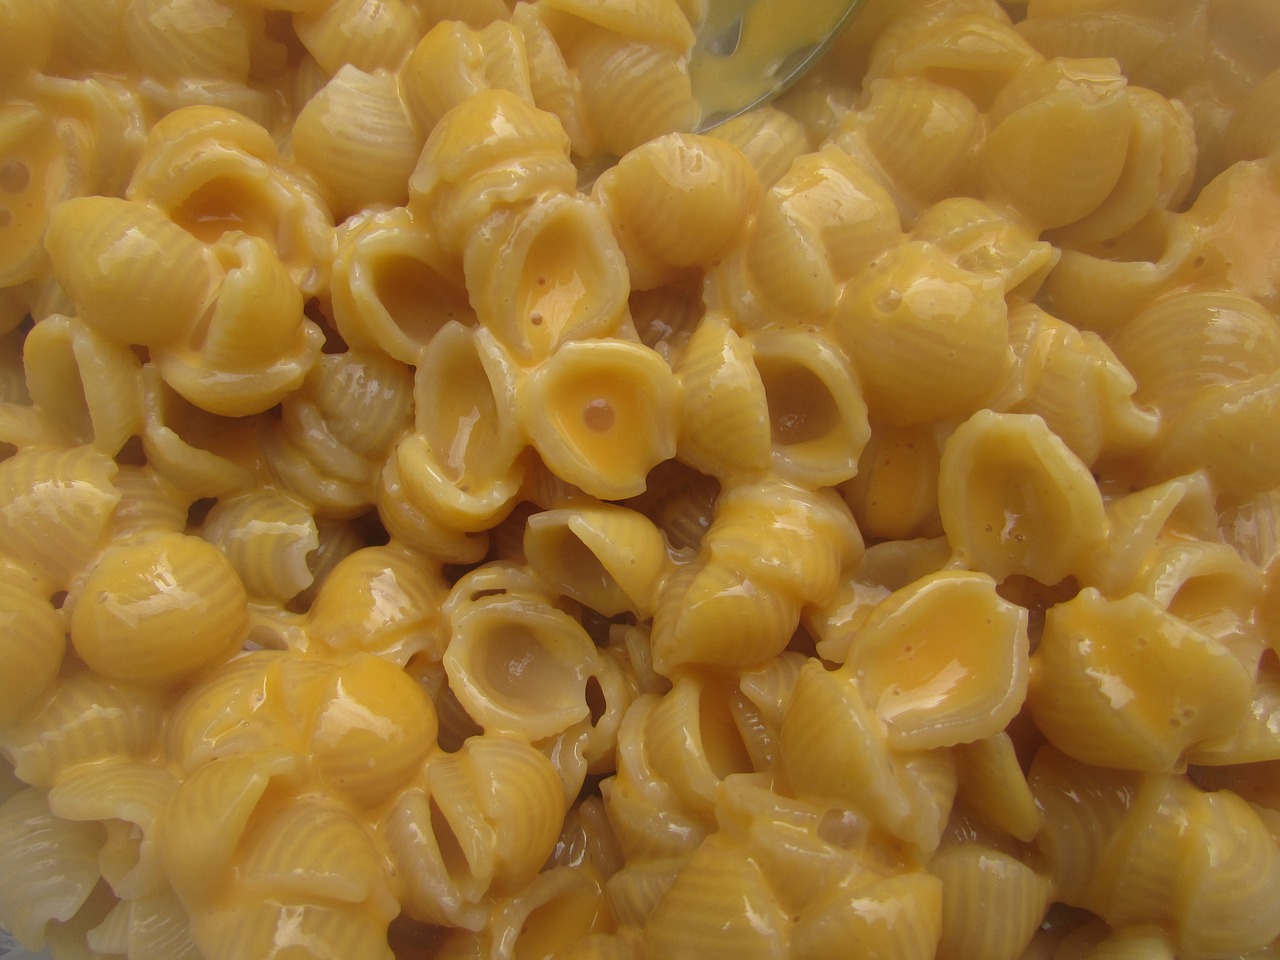 Creamy Macaroni and Cheese For One